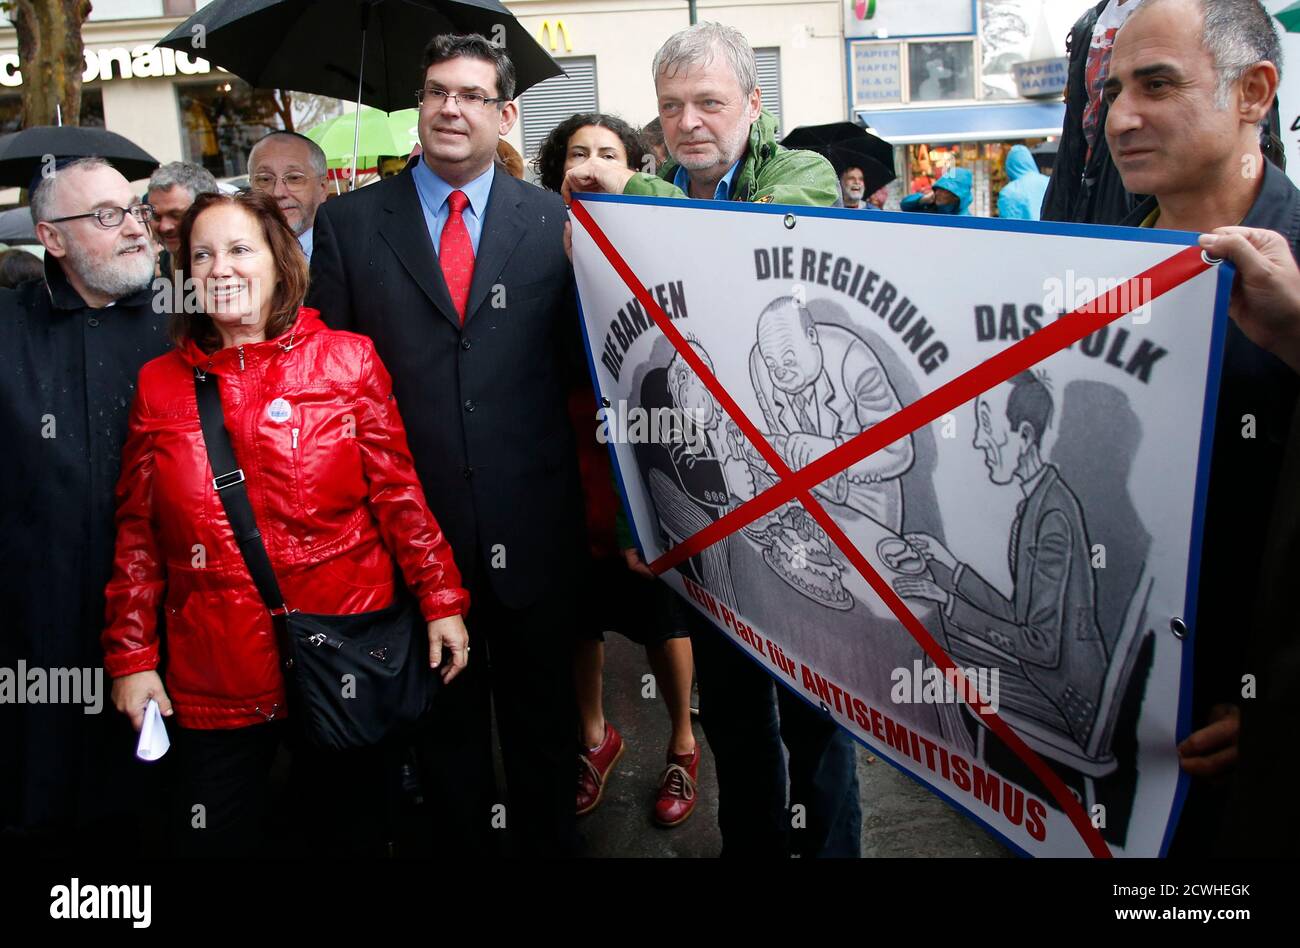 Rabbi Paul Chaim Eisenberg (L) and the President of the Jewish Community in  Austria Oskar Deutsch (3rdL) participate in a protest against anti-Semitism  in Vienna September 12, 2012. While Austria is one